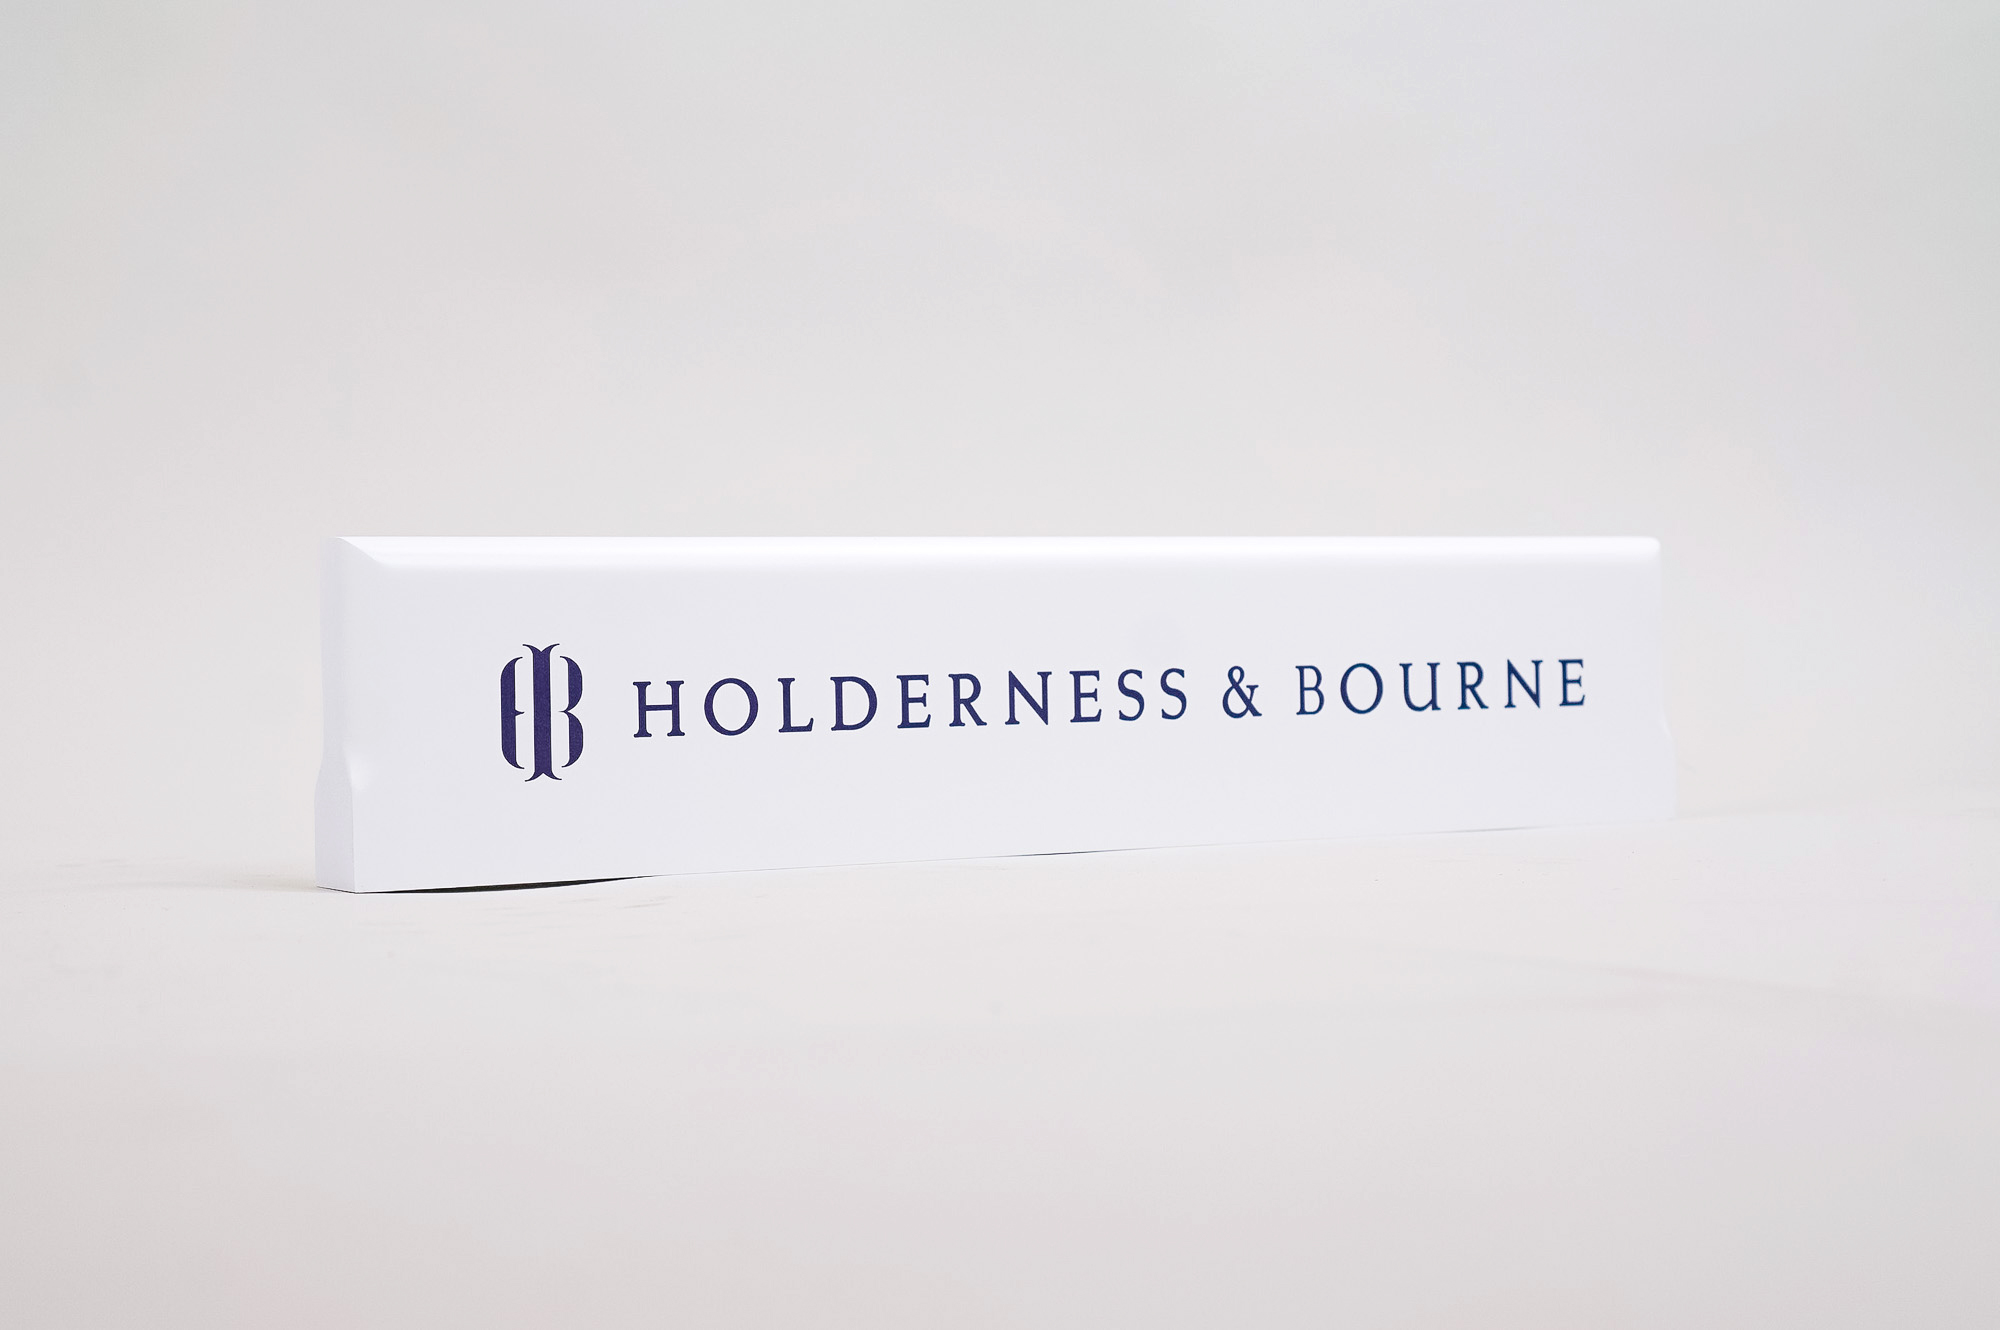 White and navy blue wood retail signs for Holderness & Bourne, a premium golf apparel and accessories company.